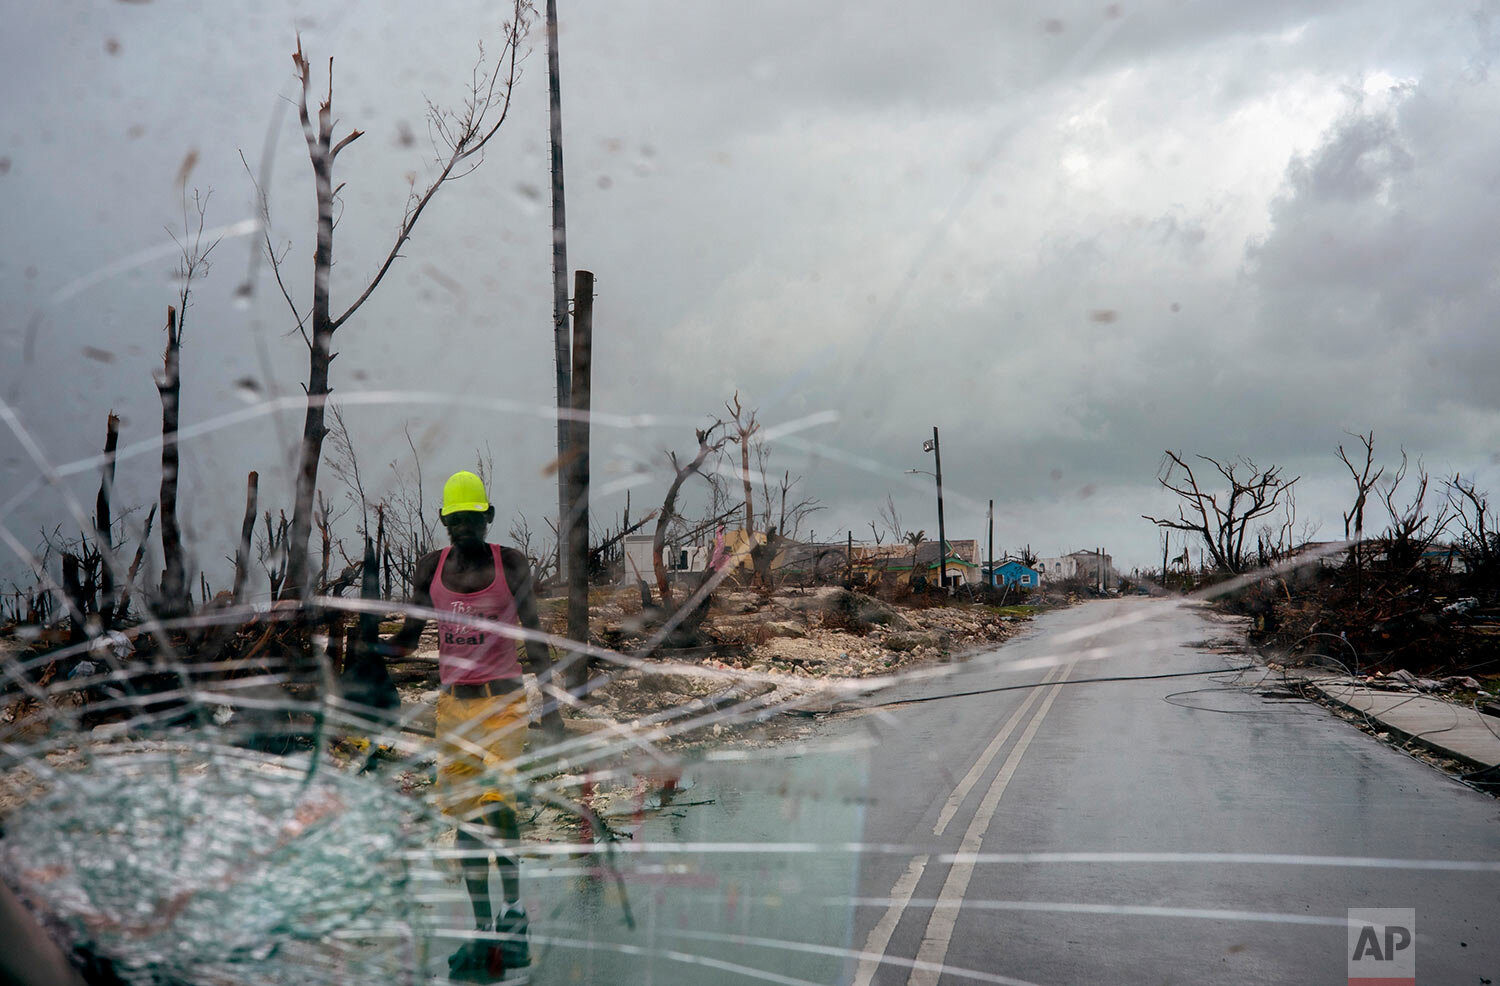  Trees destroyed by Hurricane Dorian line a road as a man walks by, in Abaco, Bahamas, Monday, Sept. 16, 2019. (AP Photo/Ramon Espinosa) 